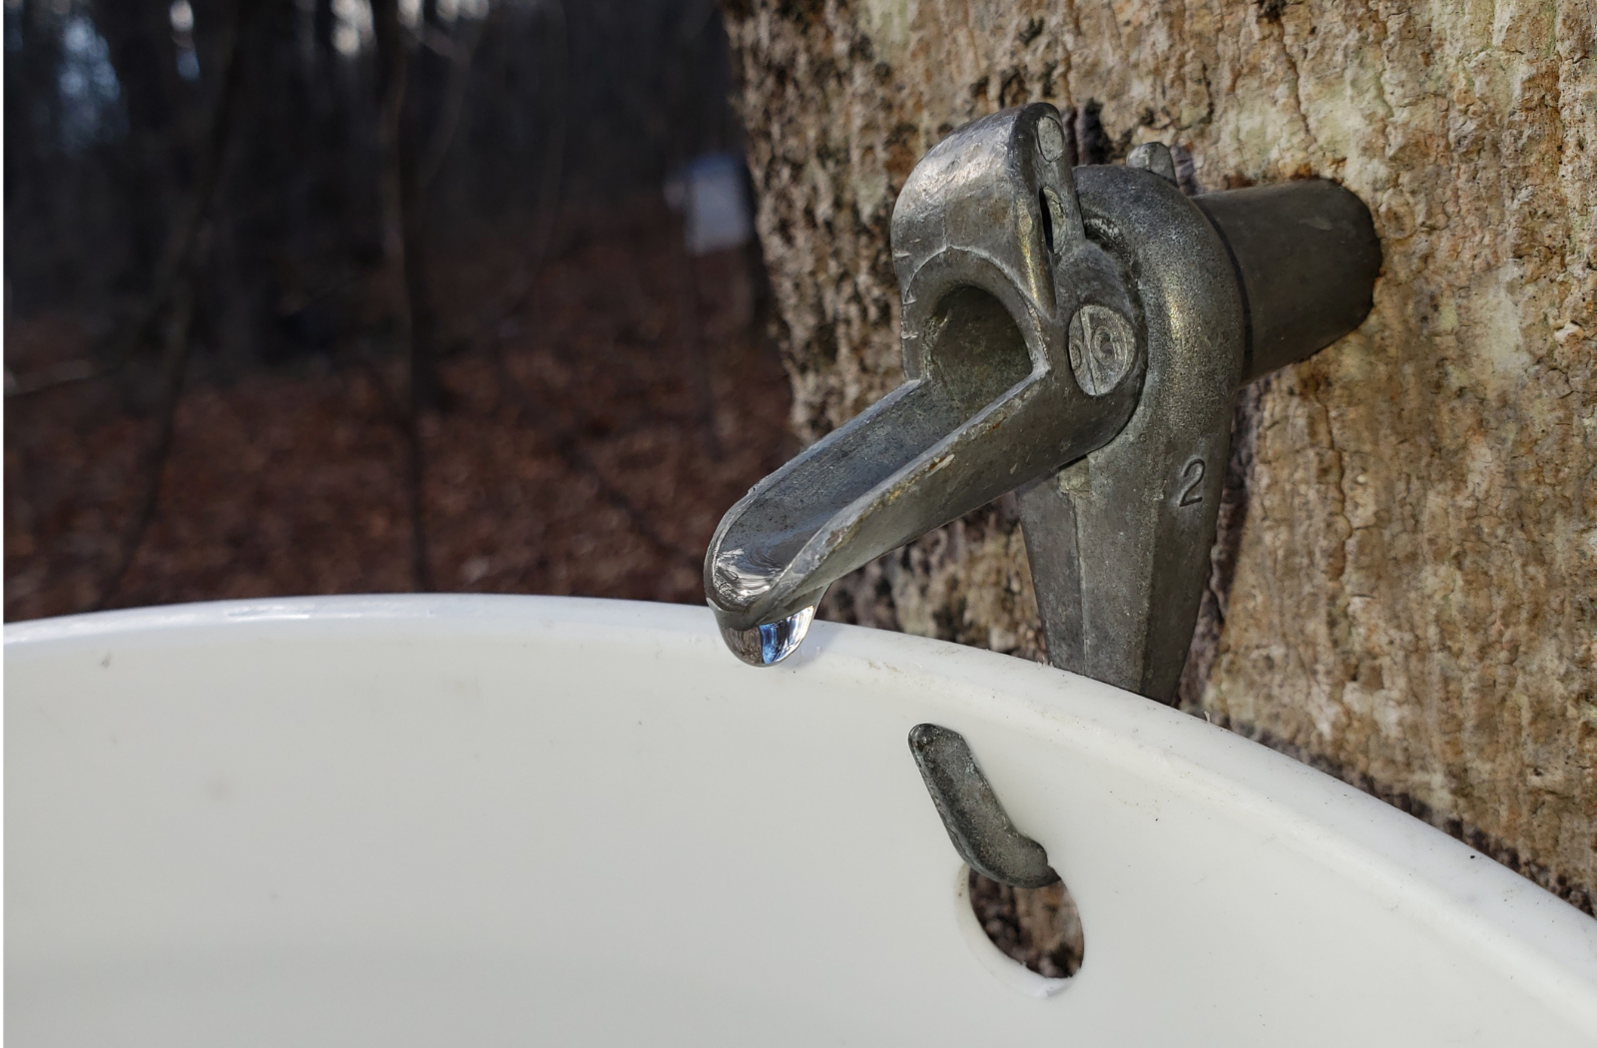 Close up on a droplet of clear sap coming out of a metal tree tap in a sugarbush